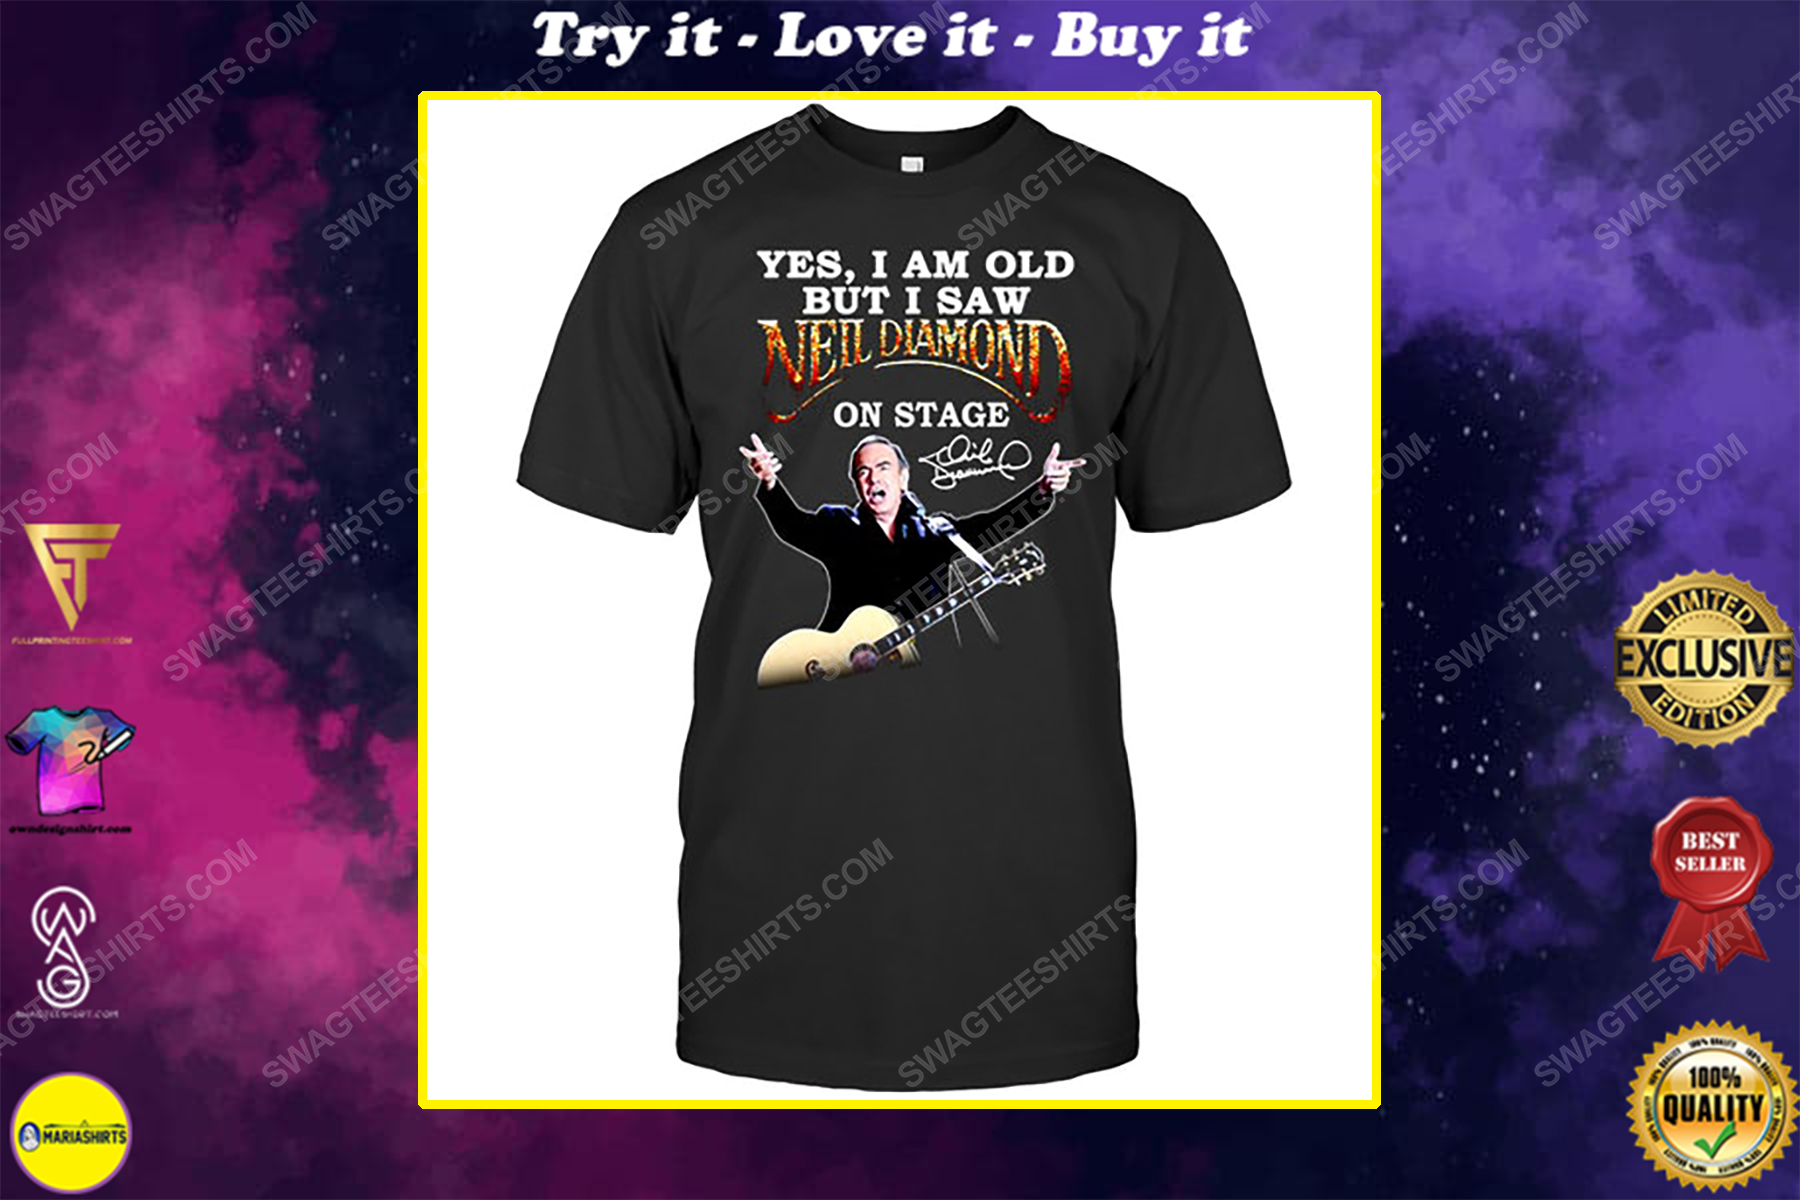 Yes i am old but i saw neil diamond on stage shirt